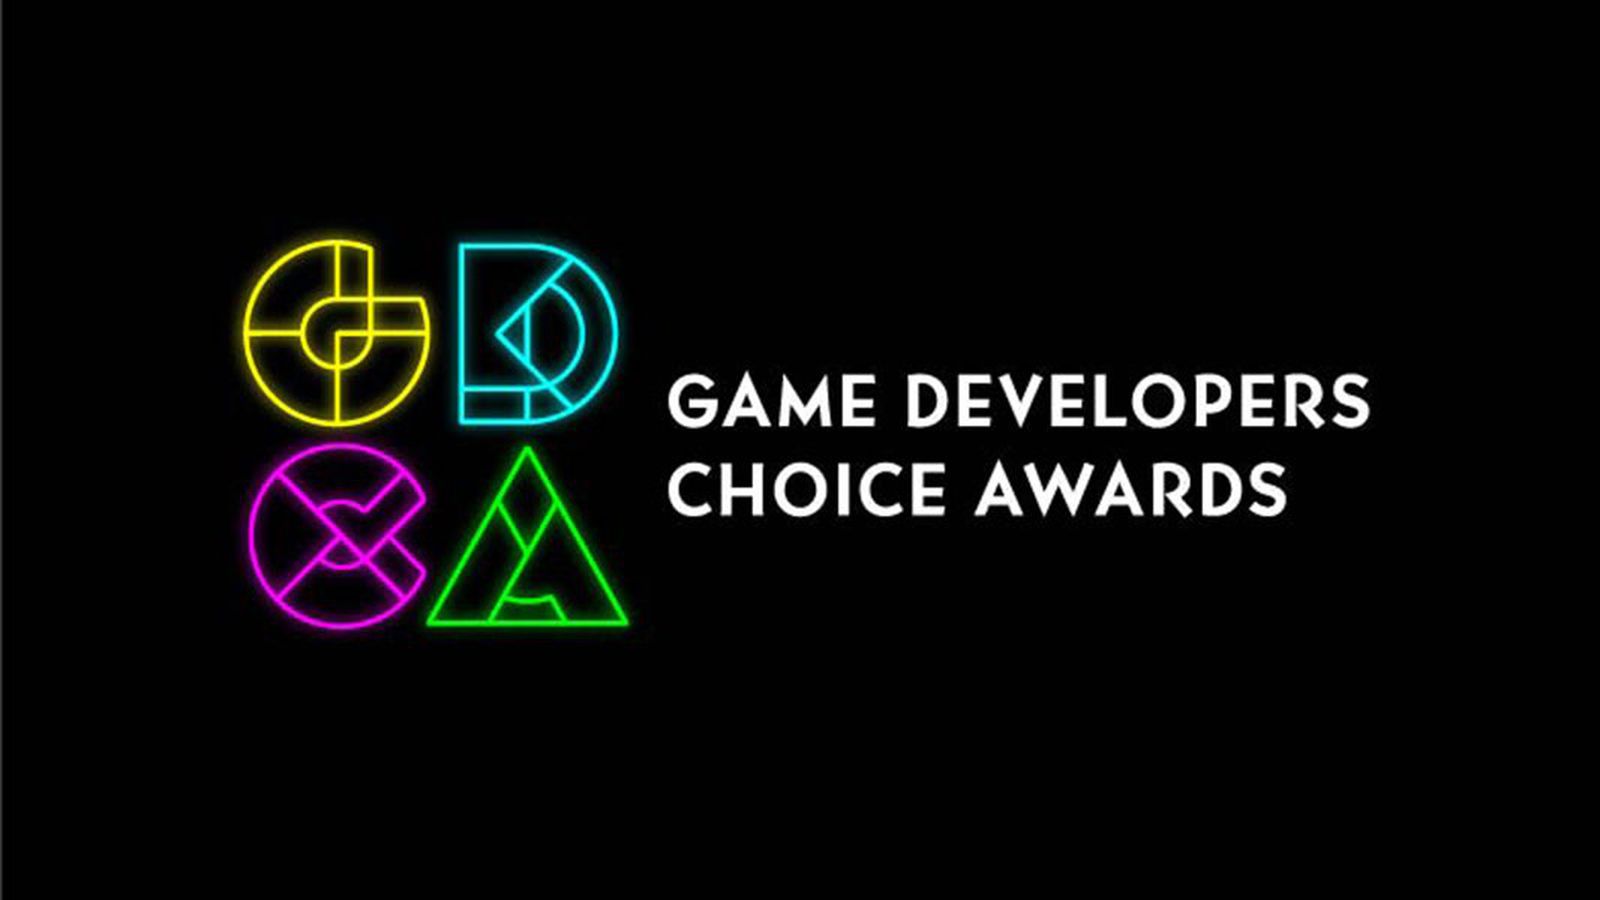 Death Stranding, Control and Outer Wilds Lead Finalists for the 20th Game Developers Choice Awards